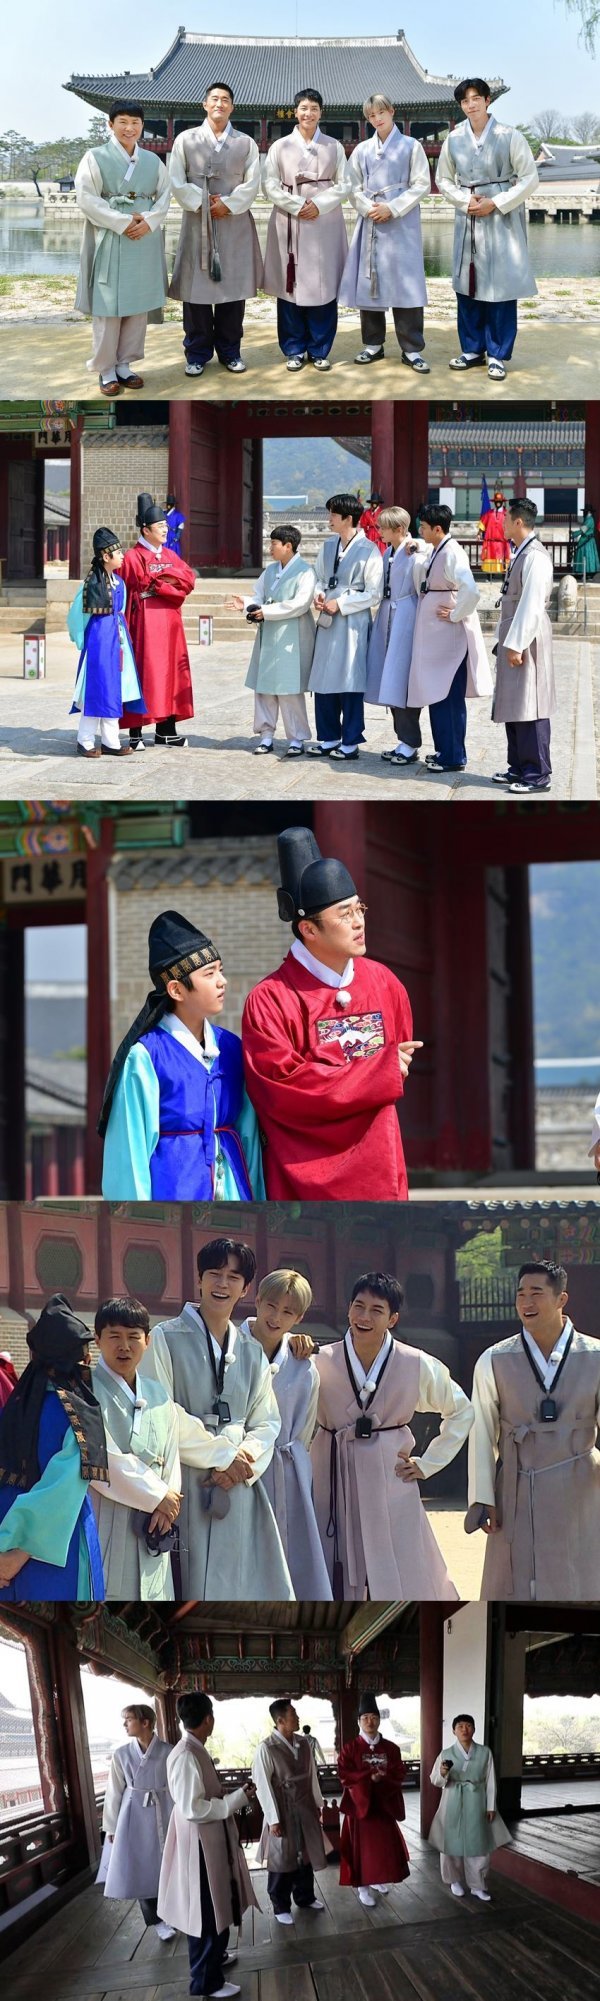 On SBS All The Butlers, which is broadcasted at 6:25 pm on the 2nd (Sun), the members who returned to Korea under Japan rule will be revealed.This All The Butlers film is the first in the entertainment industry to be allowed to be held with the permission of the entire Gyeongbokgung.On this day, All The Butlers members will slip time with the Korea under Japan rule.Inside the Gyeongbokgung, which has no visitors, bureaucrats, palaces, Nine, and Musa wandered around, reminiscent of the actual Korean under Japan rule palace.In particular, Yang Se-hyeong said, The scale is getting bigger.The master who made all these glory enjoy Baro Gyeongbokgung.The master is said to have given the members a meaningful day as the first non-personal master of All The Butlers.In addition, on this day, Korean history star lecturer Choi Tae-sung and actor Kim Kang-hoon will appear as surprise support groups of Gyongbokgung master.There was a special gift from Master Gyeongbokgung to All The Butlers.The opening of a special space of Gyeongbokgung that can not be easily entered by Baro, which allowed not only the second floor space of Gyeonghoeru where you can enjoy the beautiful scenery of Gyeongbokgung but also the inside of the temple.The Annals of the Palace, which will record a historic moment with Master Gyeongbokgung, will be released on SBS All The Butlers, which will be broadcasted at 6:25 pm on the 2nd (Sunday).